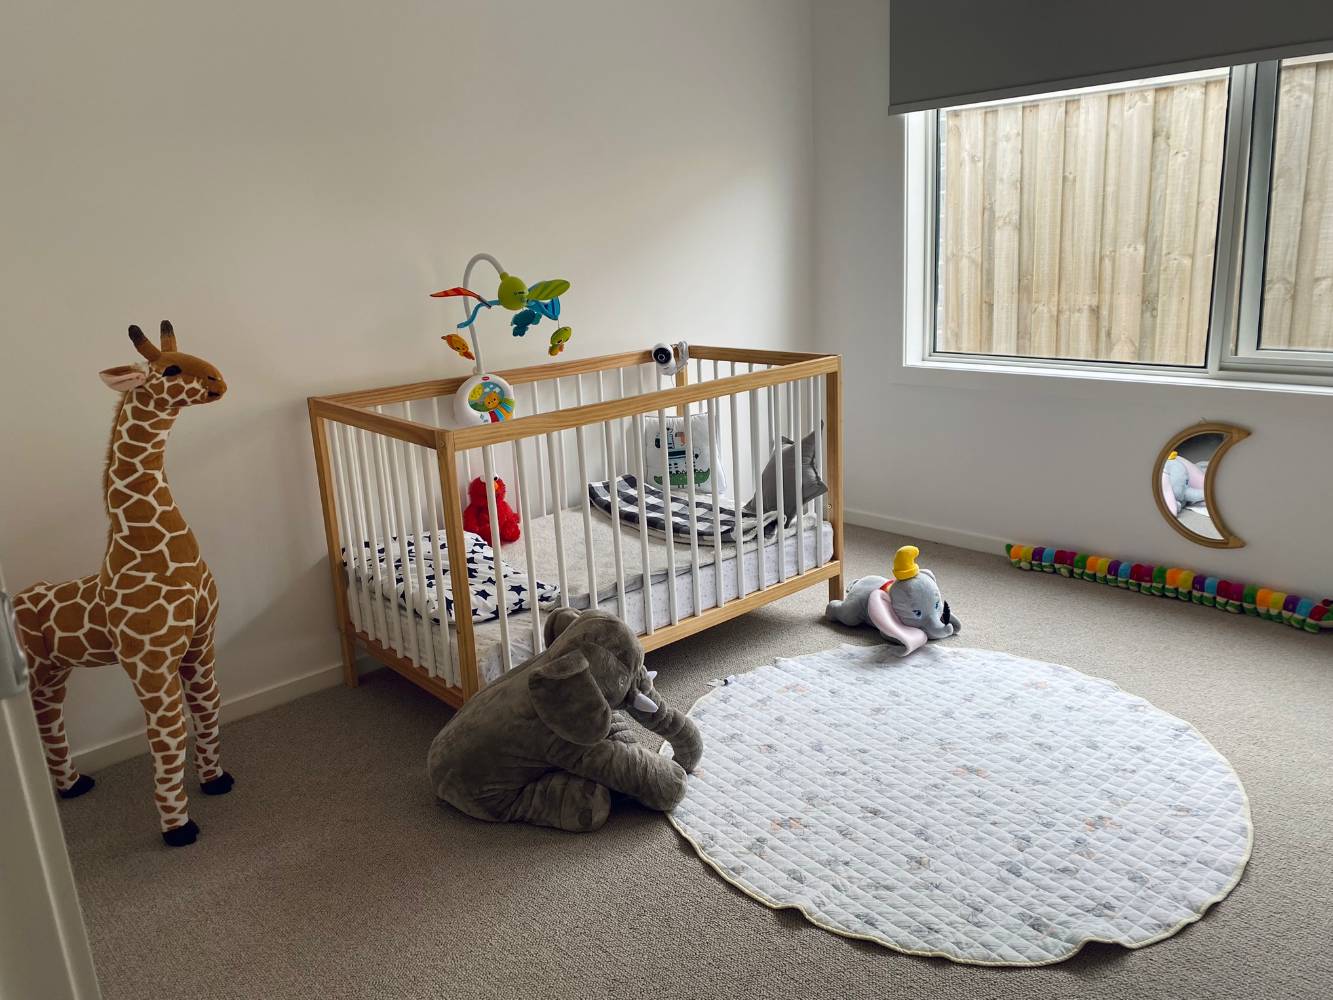 Baby’s room with cot & toys